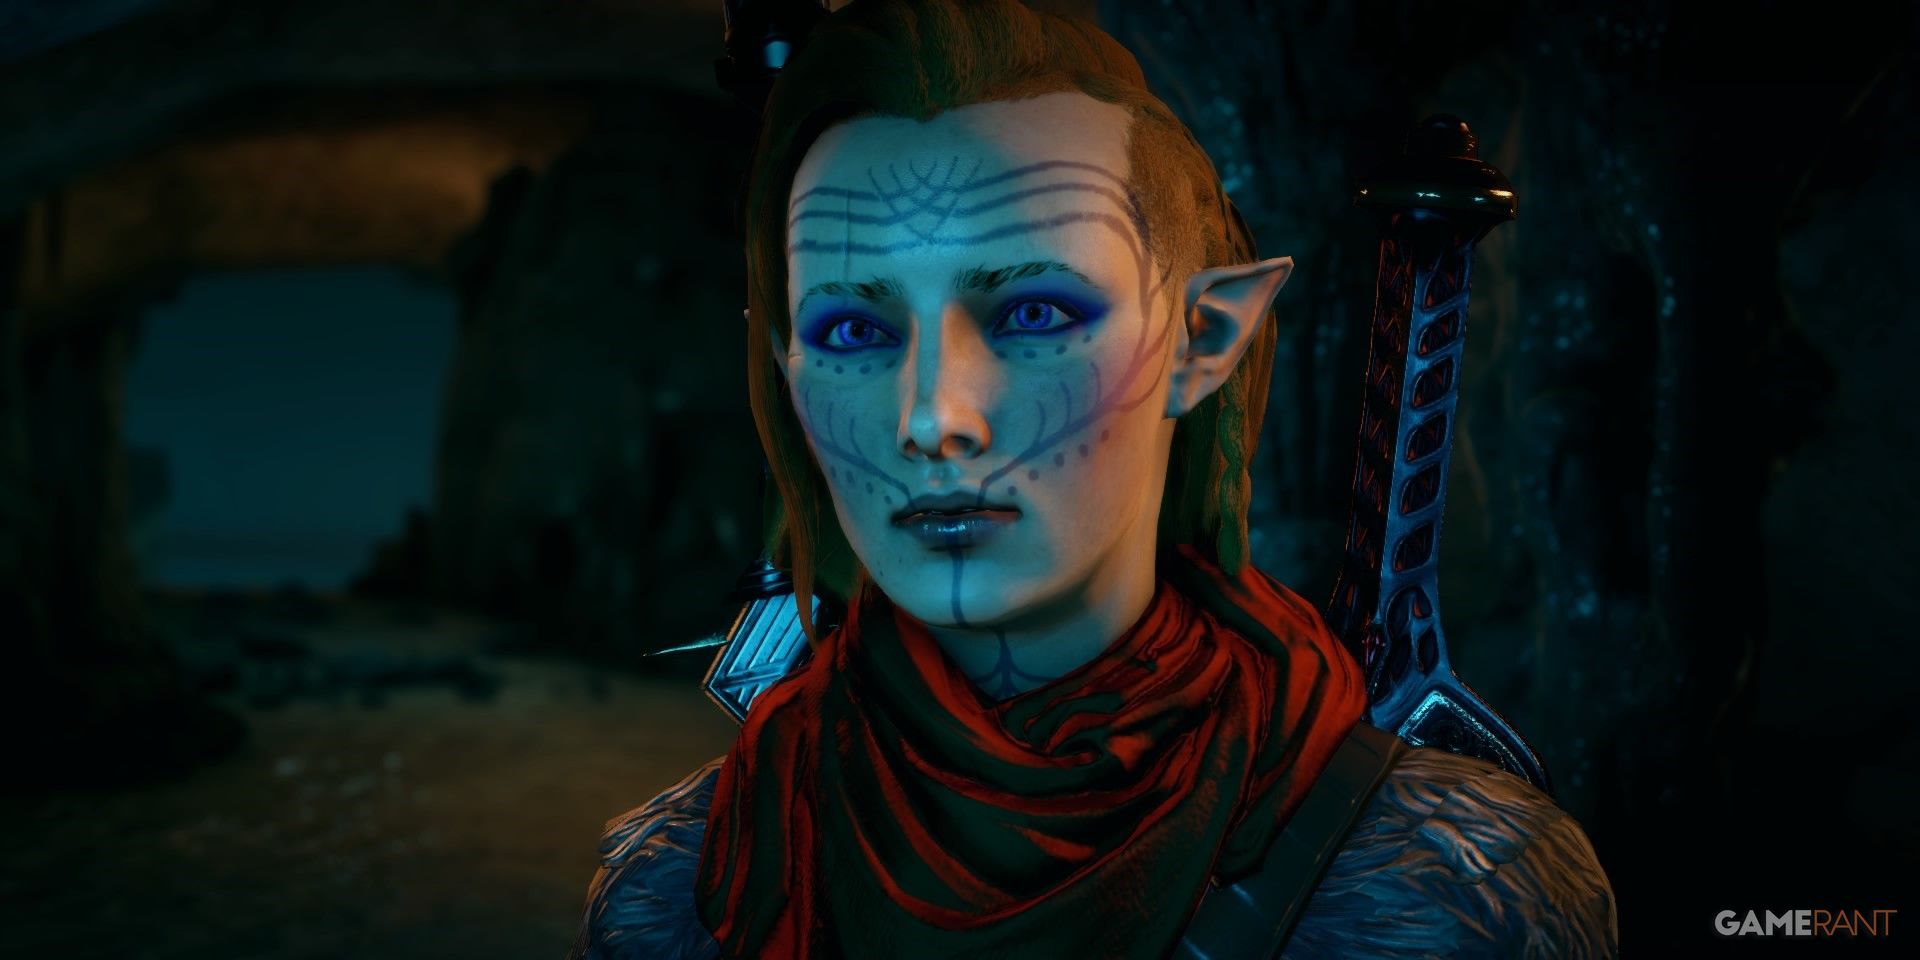 Inquisitor Lavellan investigates in the Deep Roads in the Descent DLC of Dragon Age Inquisition